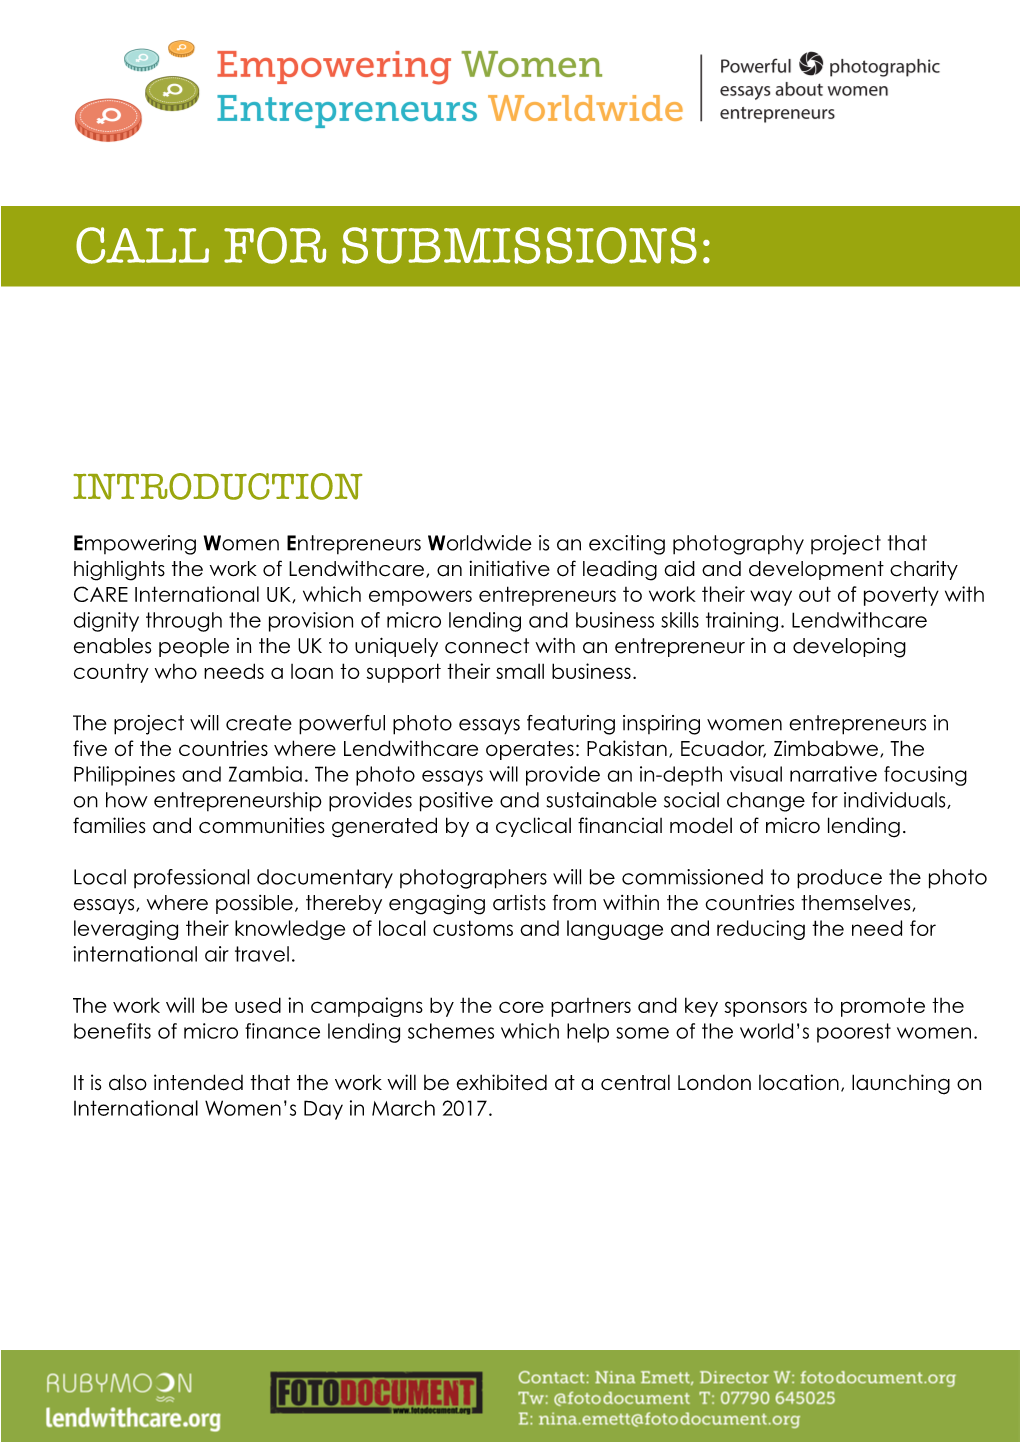 EWEW Call to Submissions